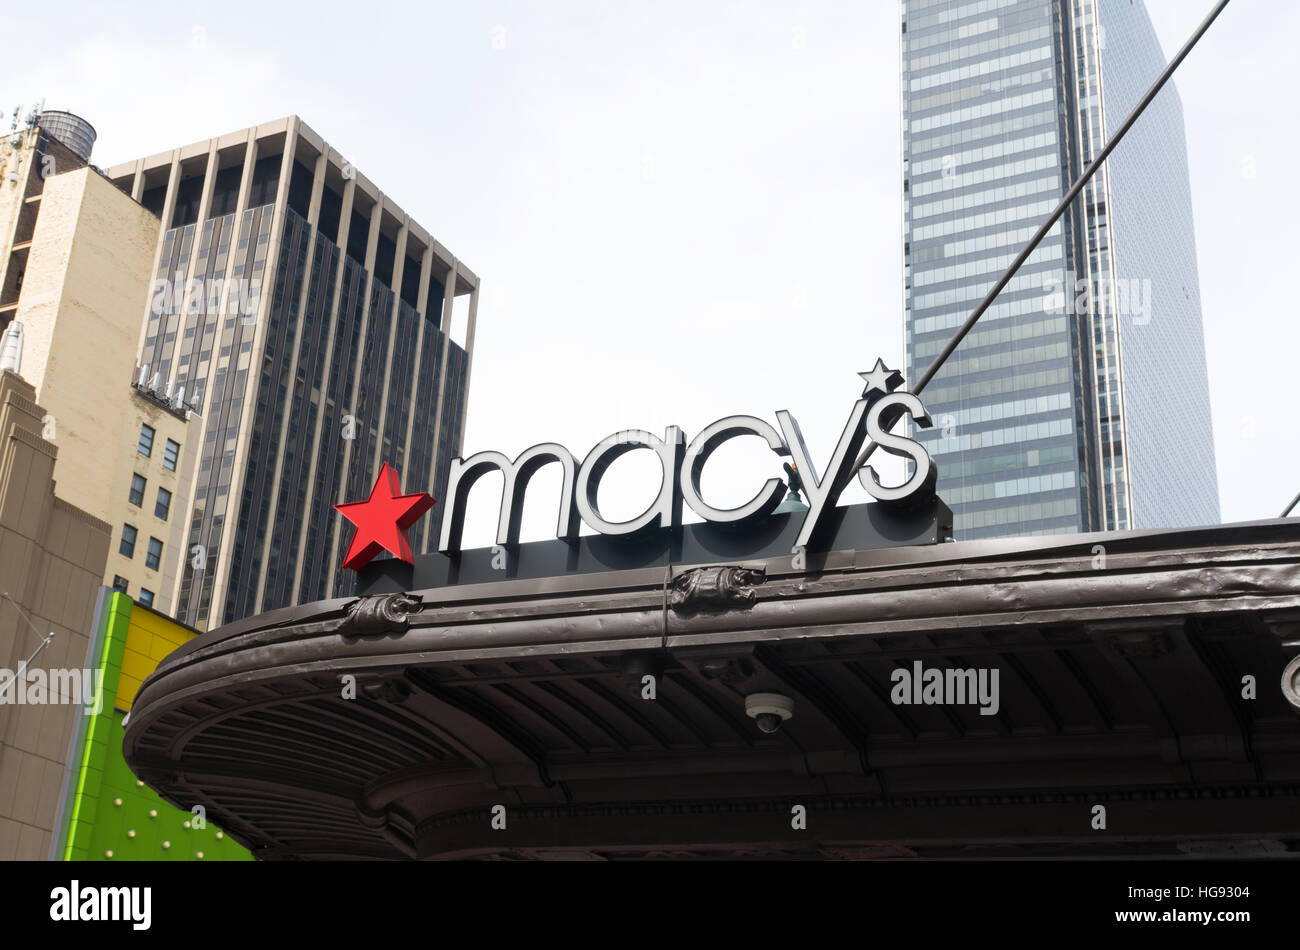 NEW YORK - APRIL 28, 2016: Macy's at Herald square in Manhattan. It is the flagship of Macy's department stores with 2.2 million square feet retail sp Stock Photo